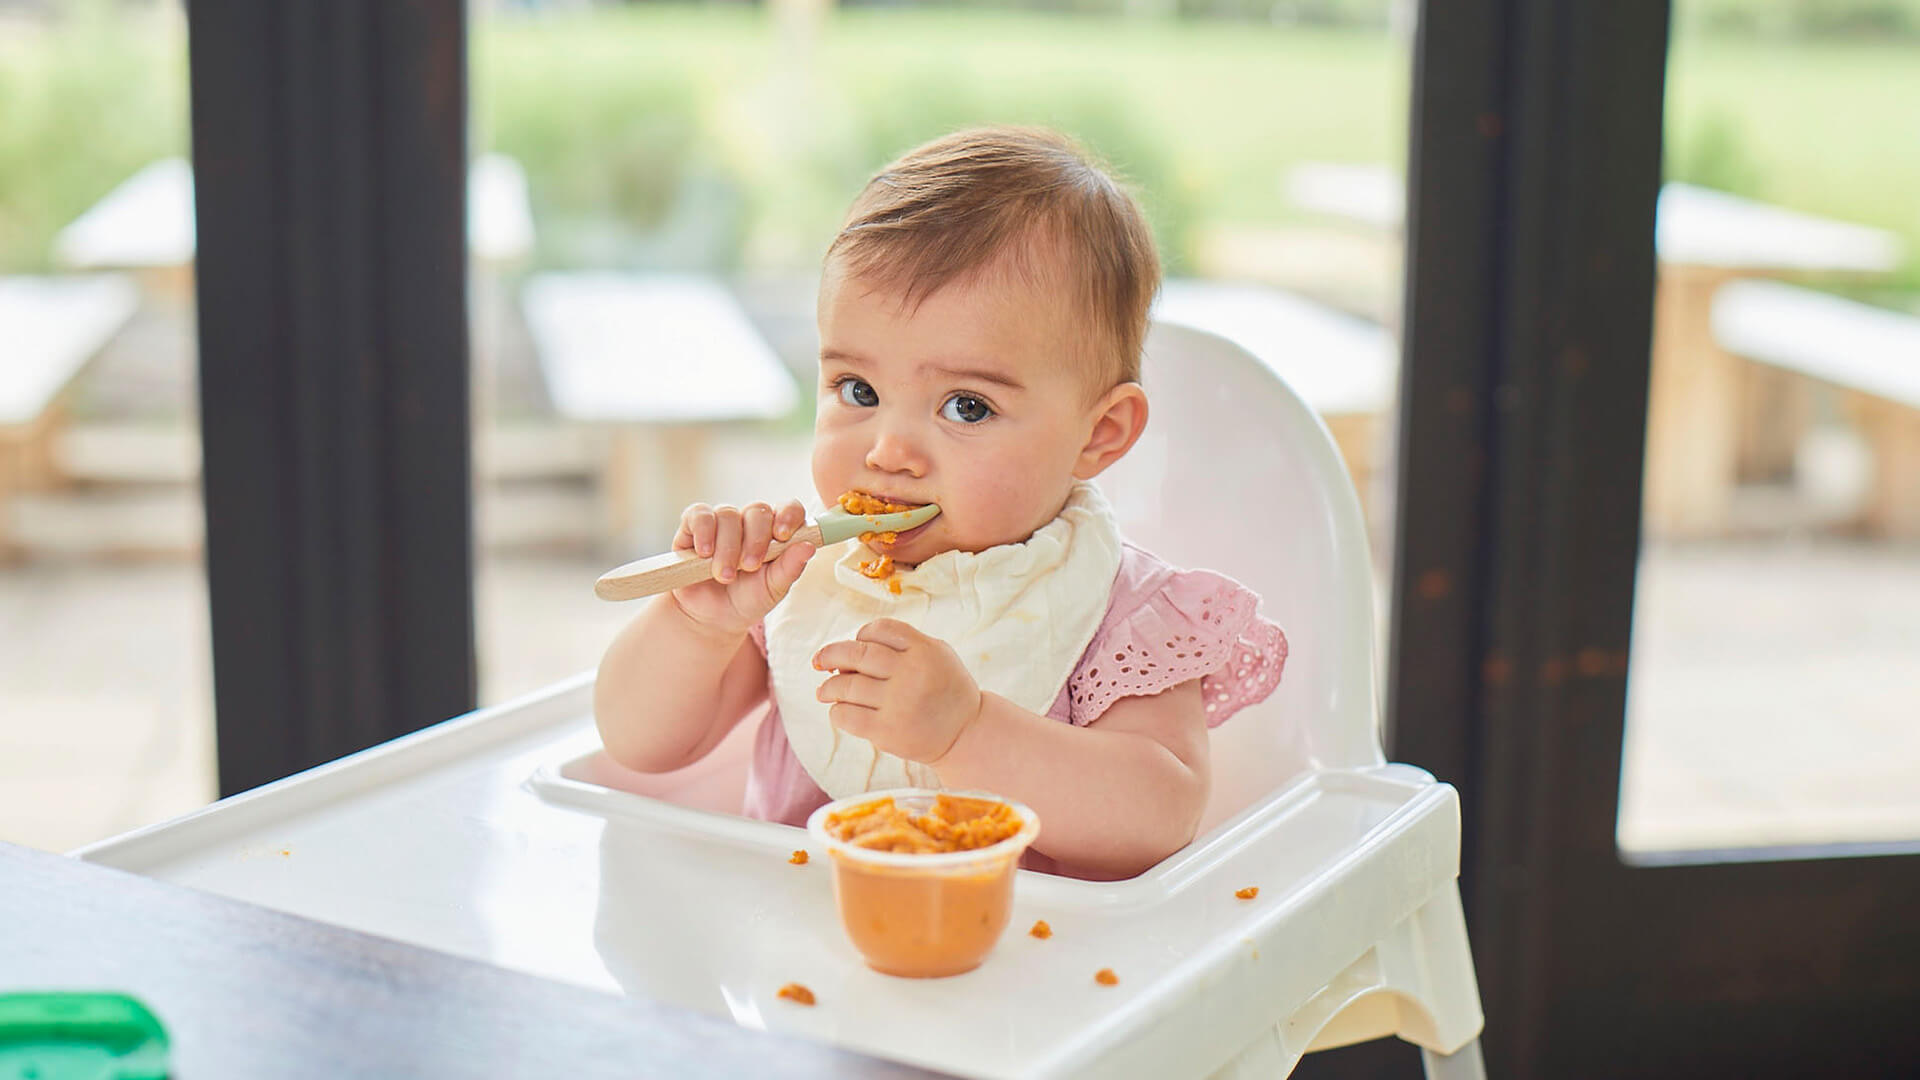 A baby sitting on a high chair and eating